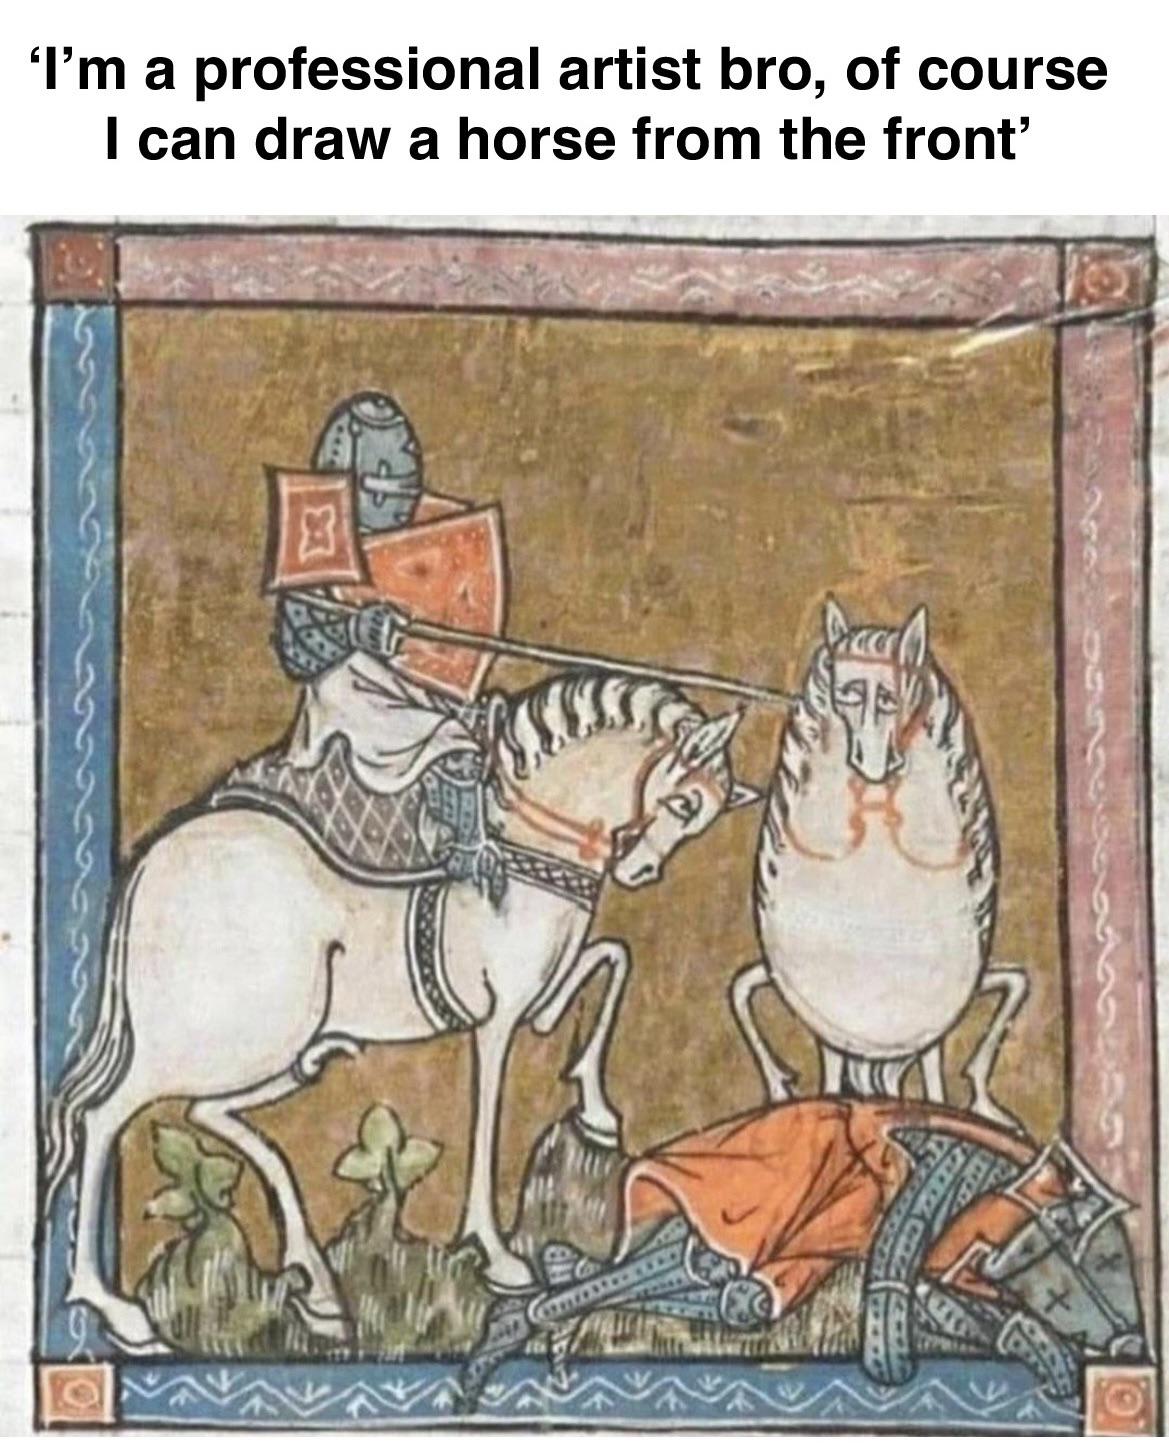 dank memes - medieval horse meme - 'I'm a professional artist bro, of course I can draw a horse from the front'